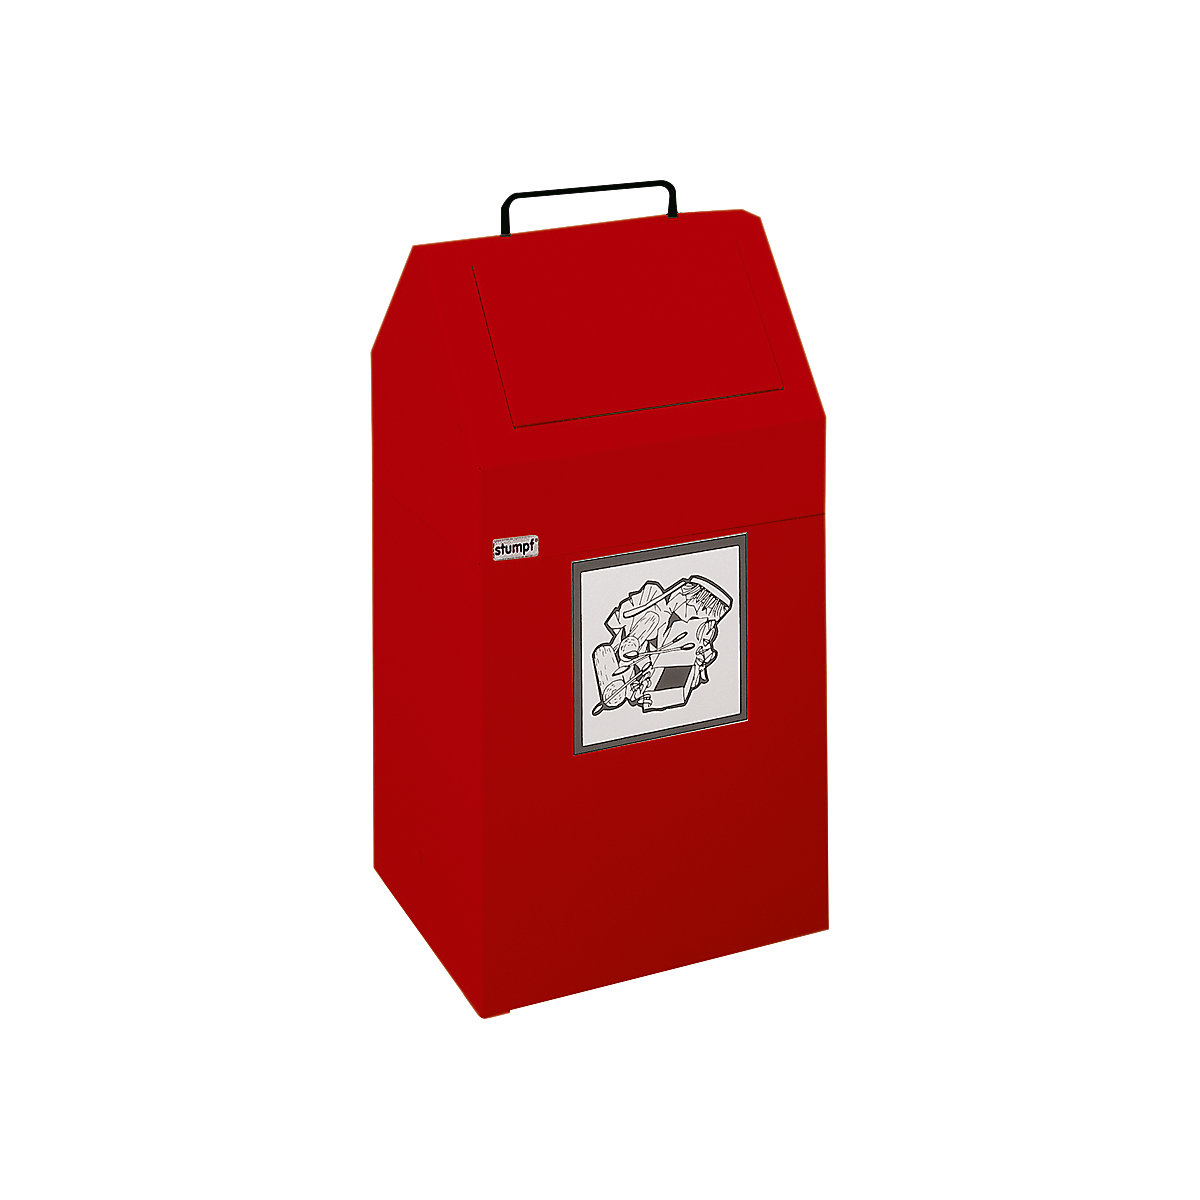 Recyclable waste container, capacity 45 l, WxHxD 320 x 650 x 310 mm, stationary, sheet steel, red RAL 3000-5